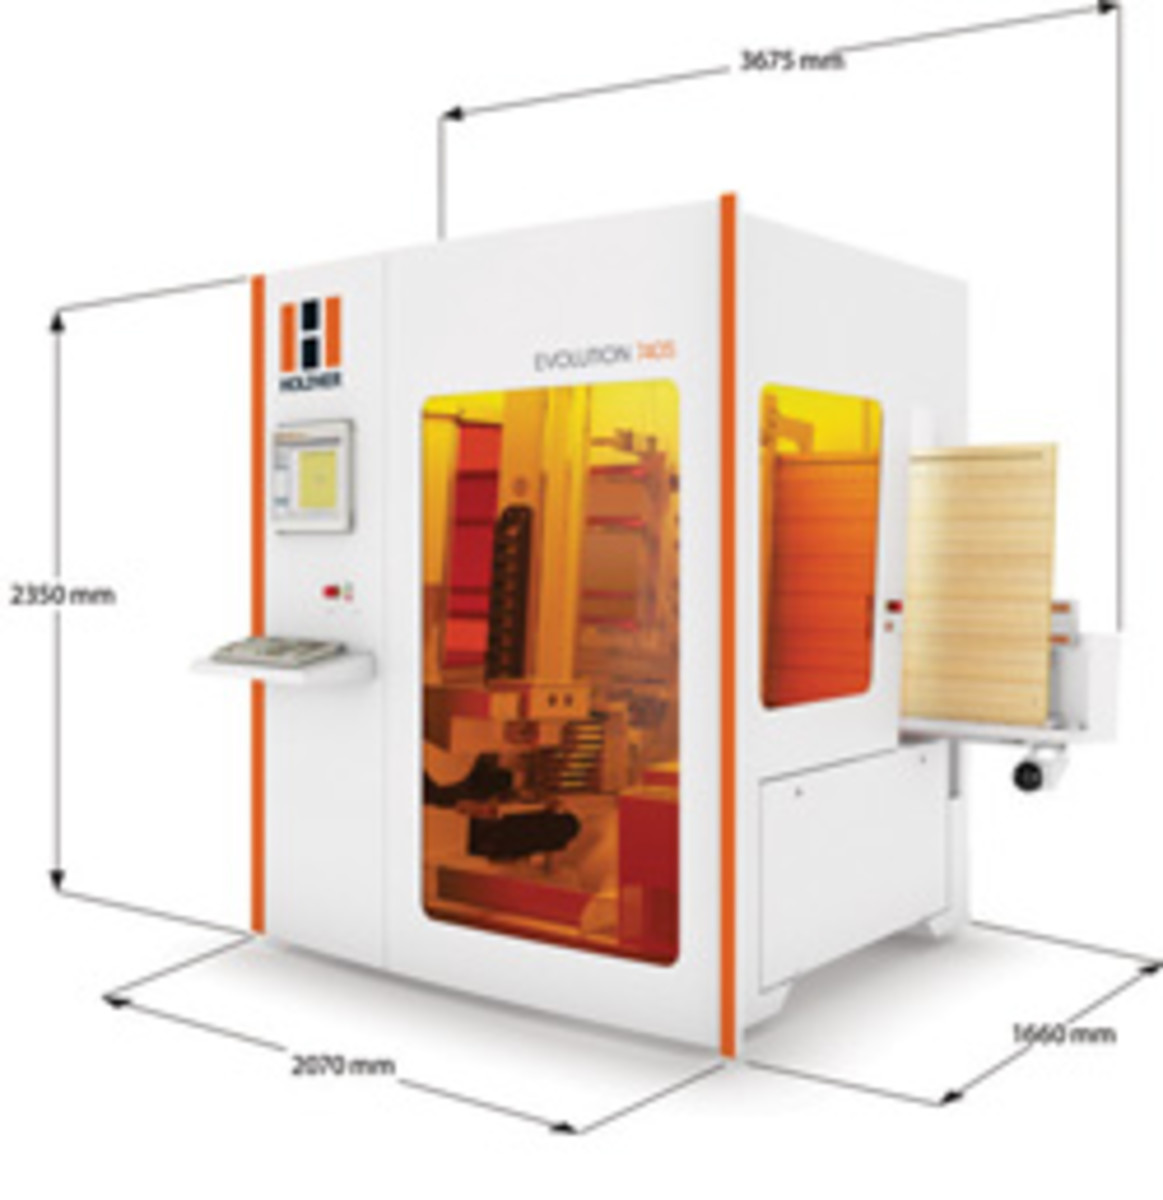 The Evolution is a revolution for its four-sided machining ability.